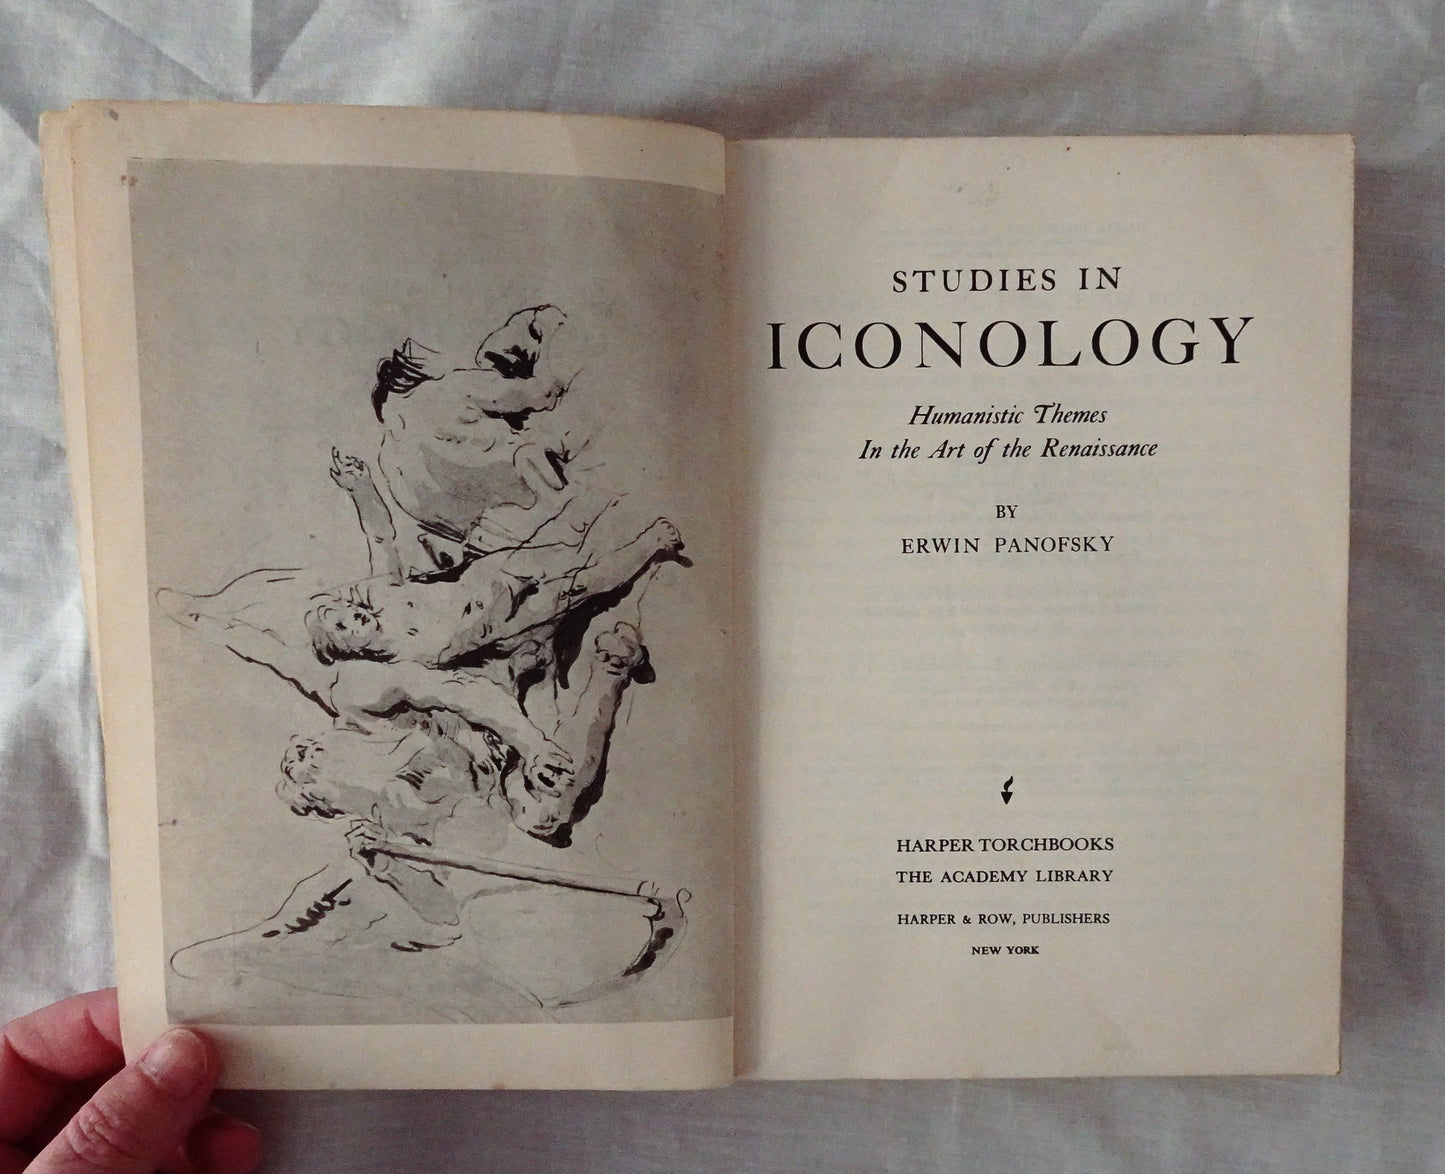 Studies in Iconology by Erwin Panofsky